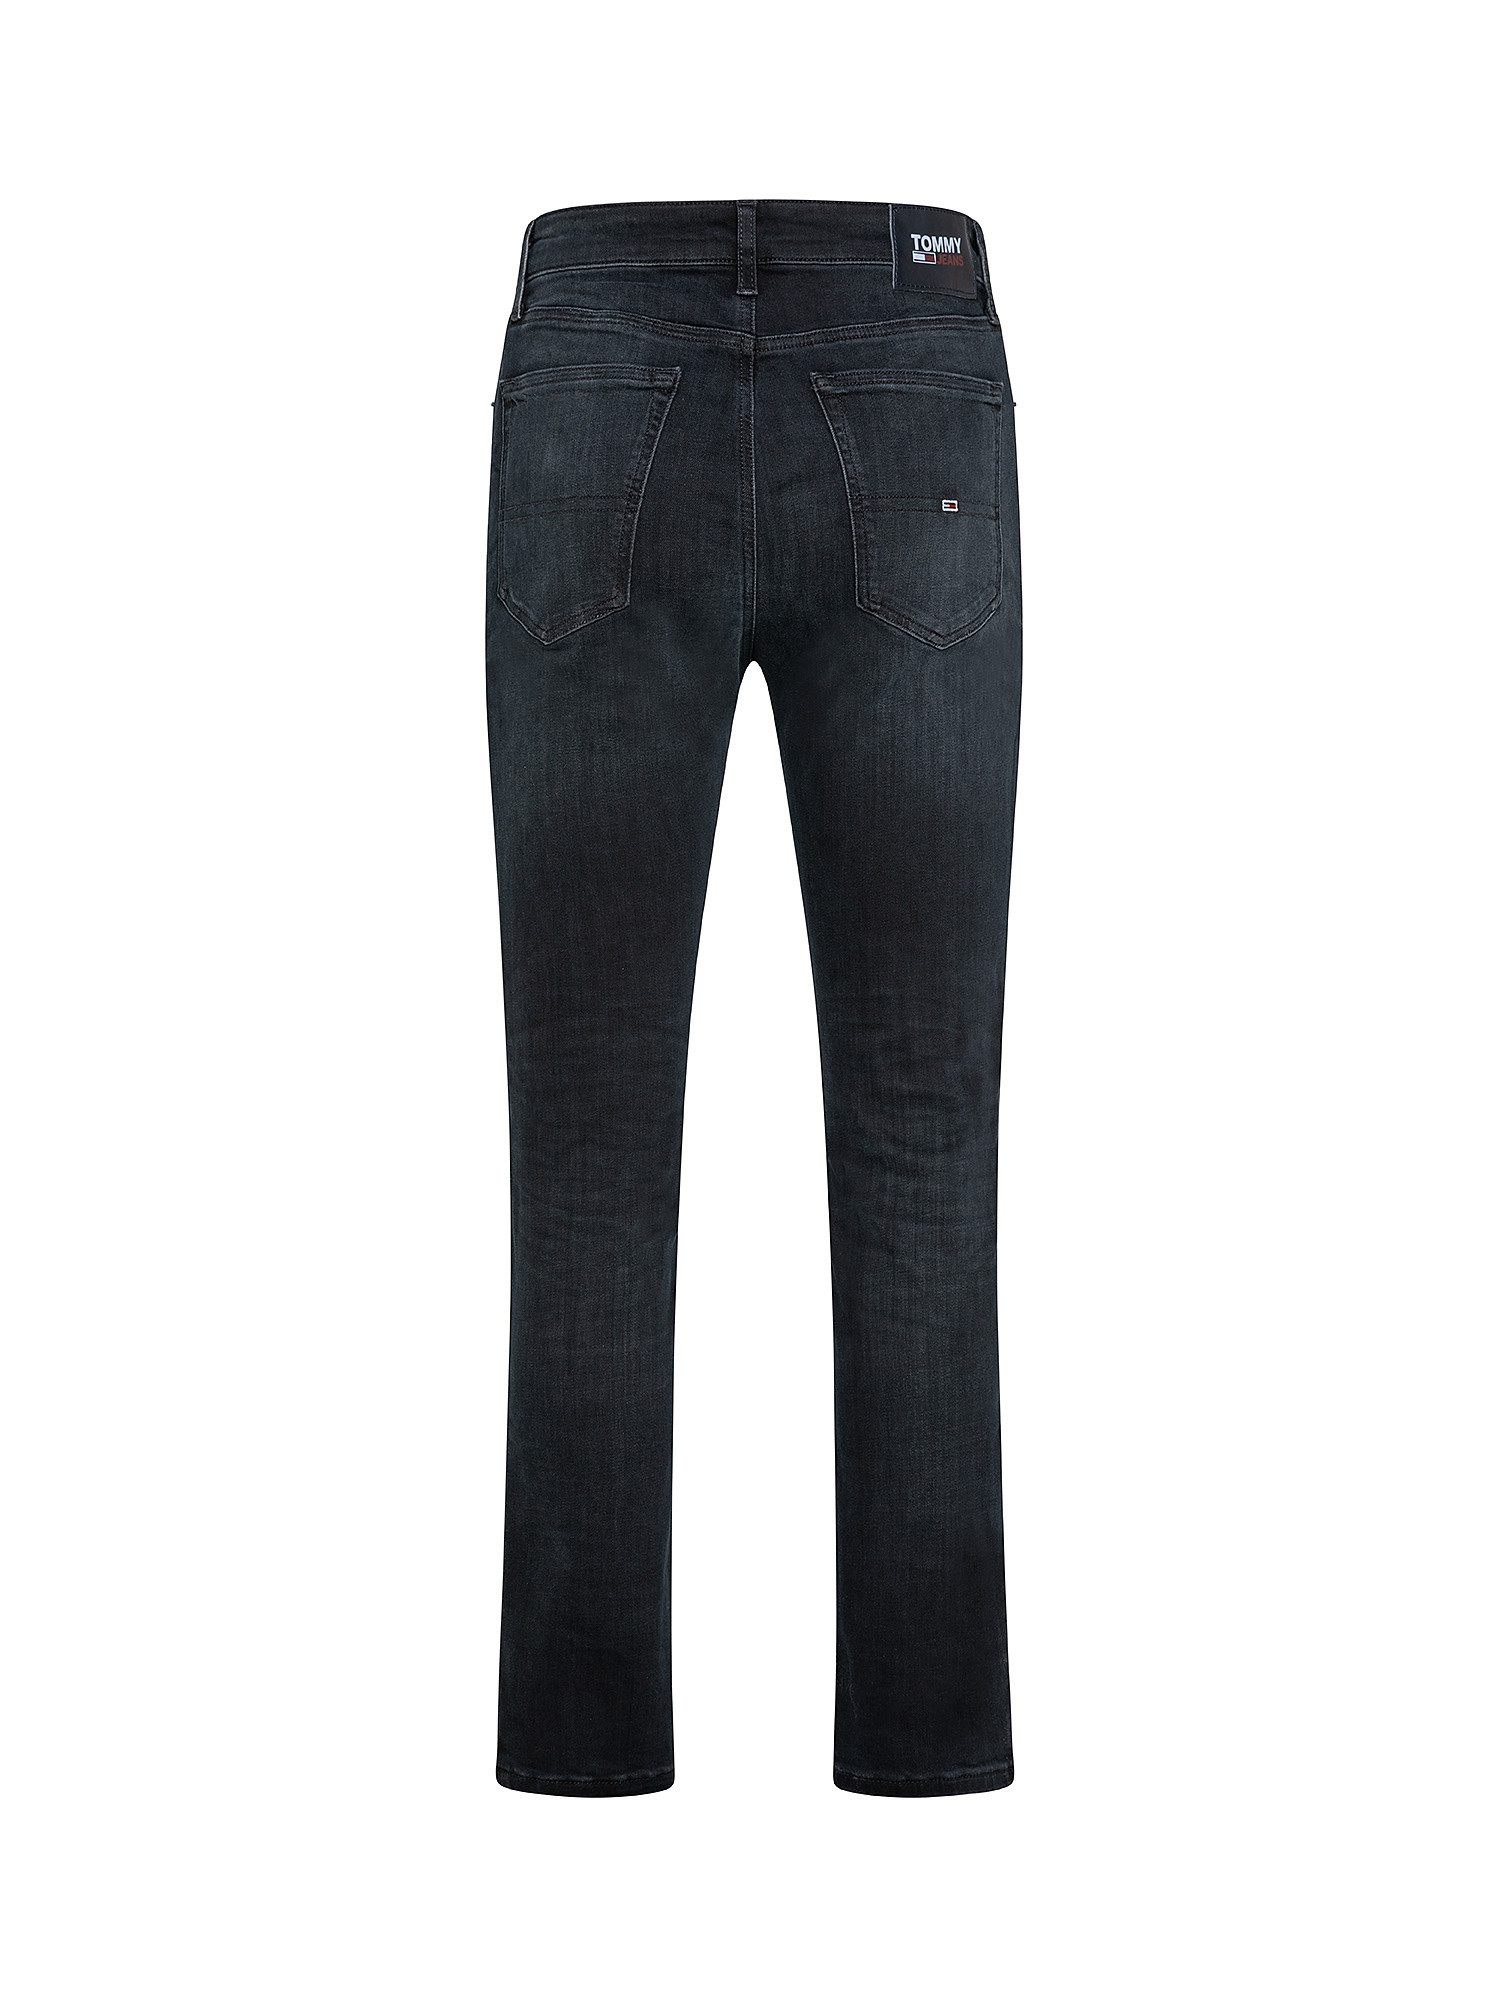 Jeans Simon skinny fit, Nero, large image number 1